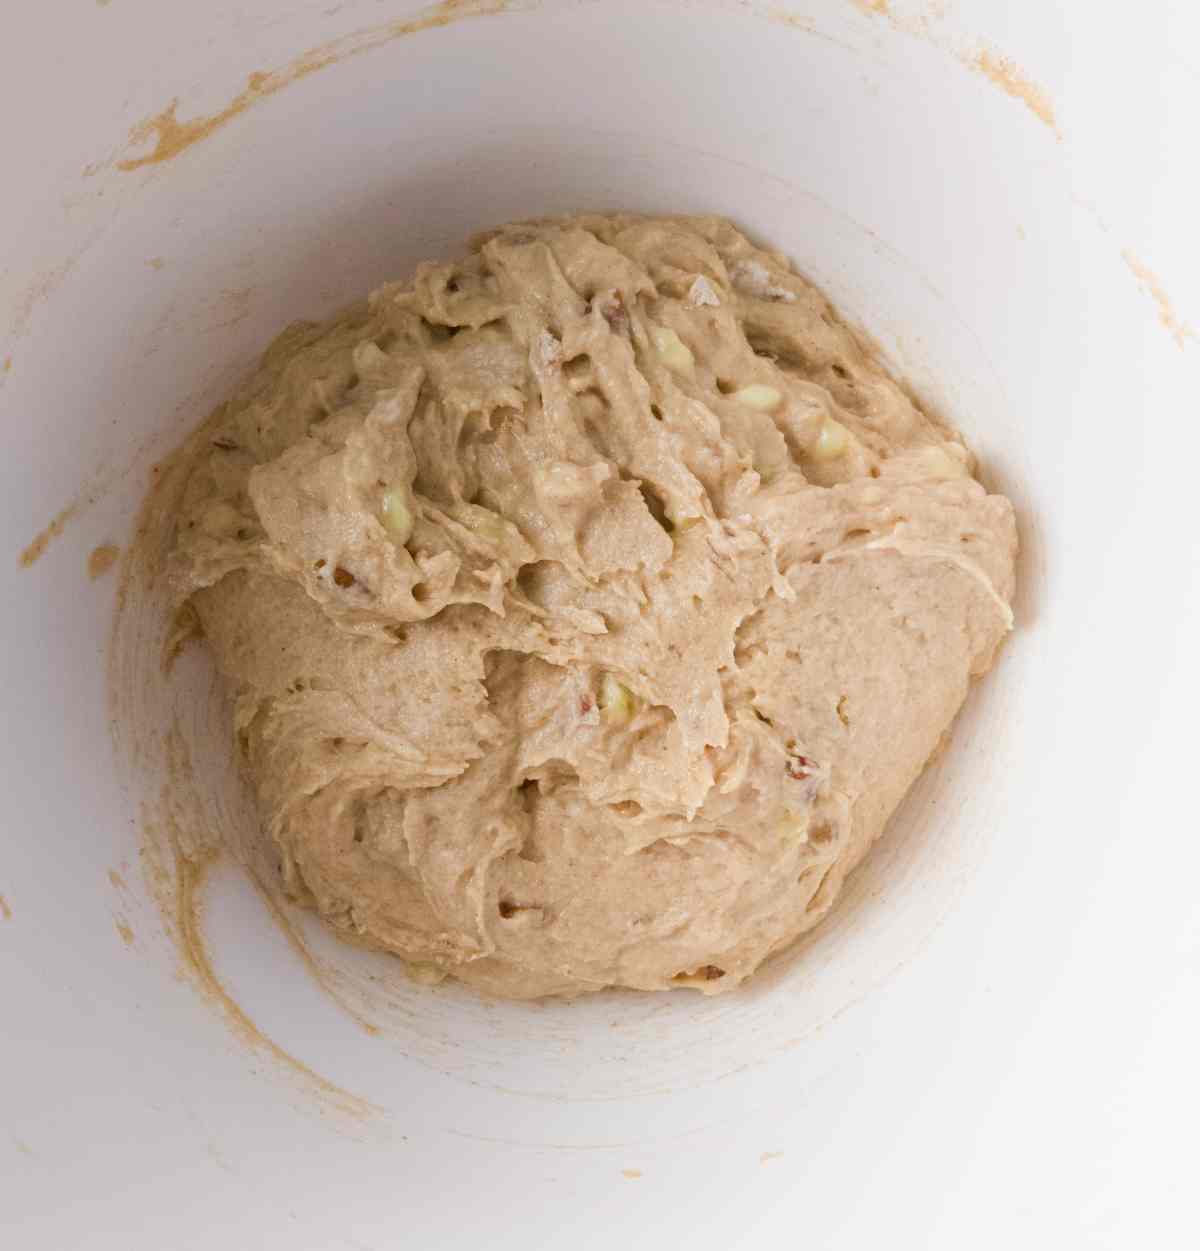 Banana bread batter combined in a mixing bowl before baking.